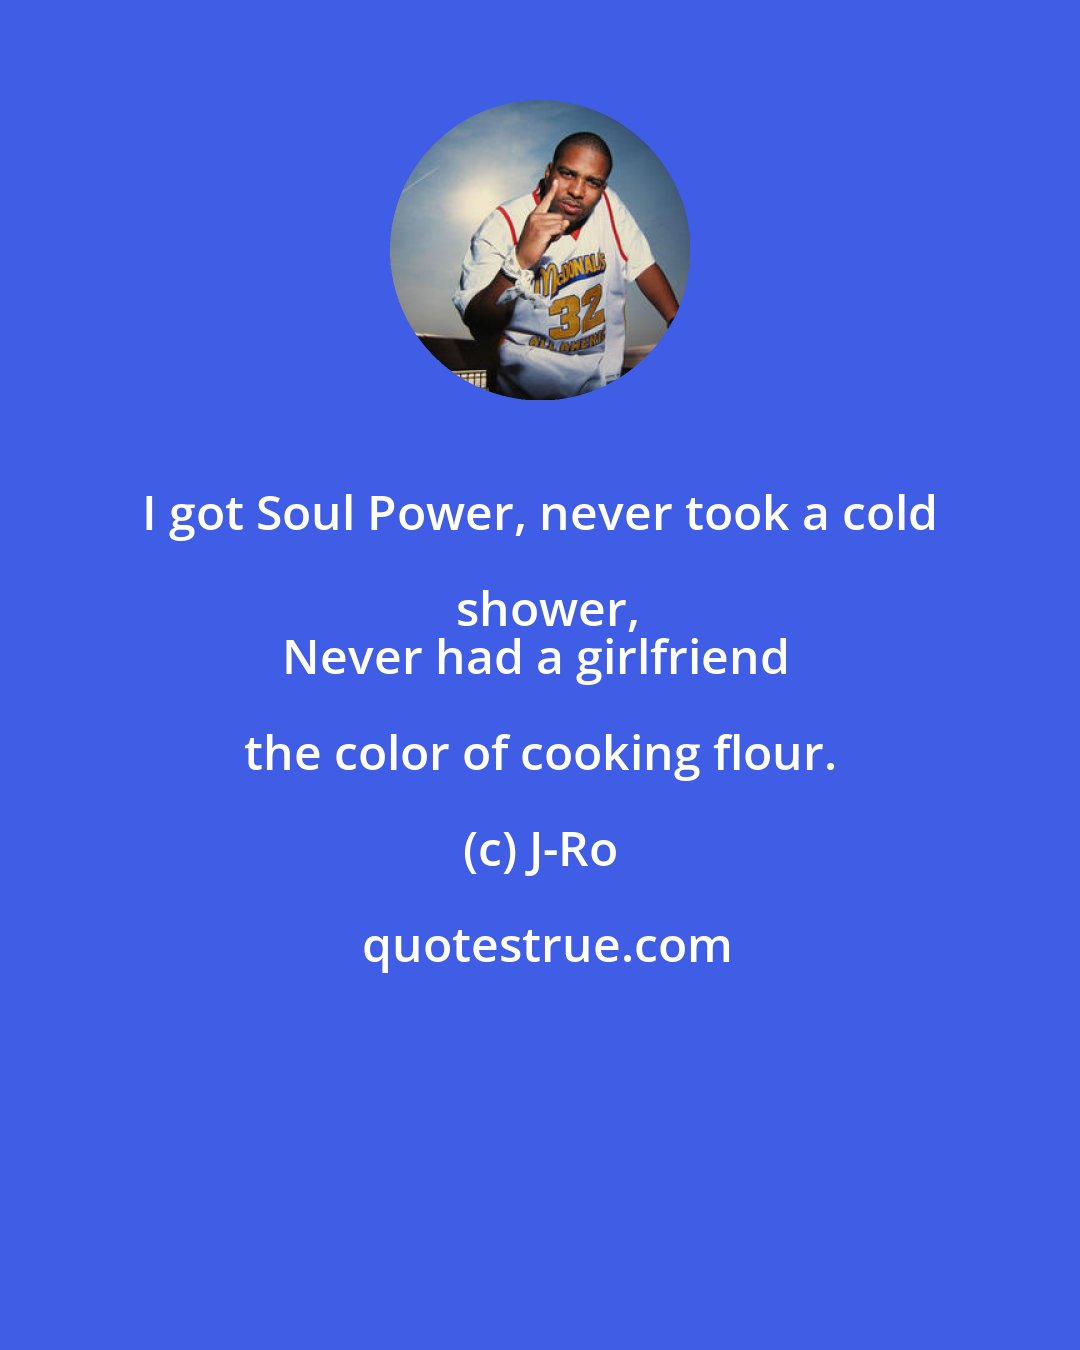 J-Ro: I got Soul Power, never took a cold shower,
Never had a girlfriend the color of cooking flour.